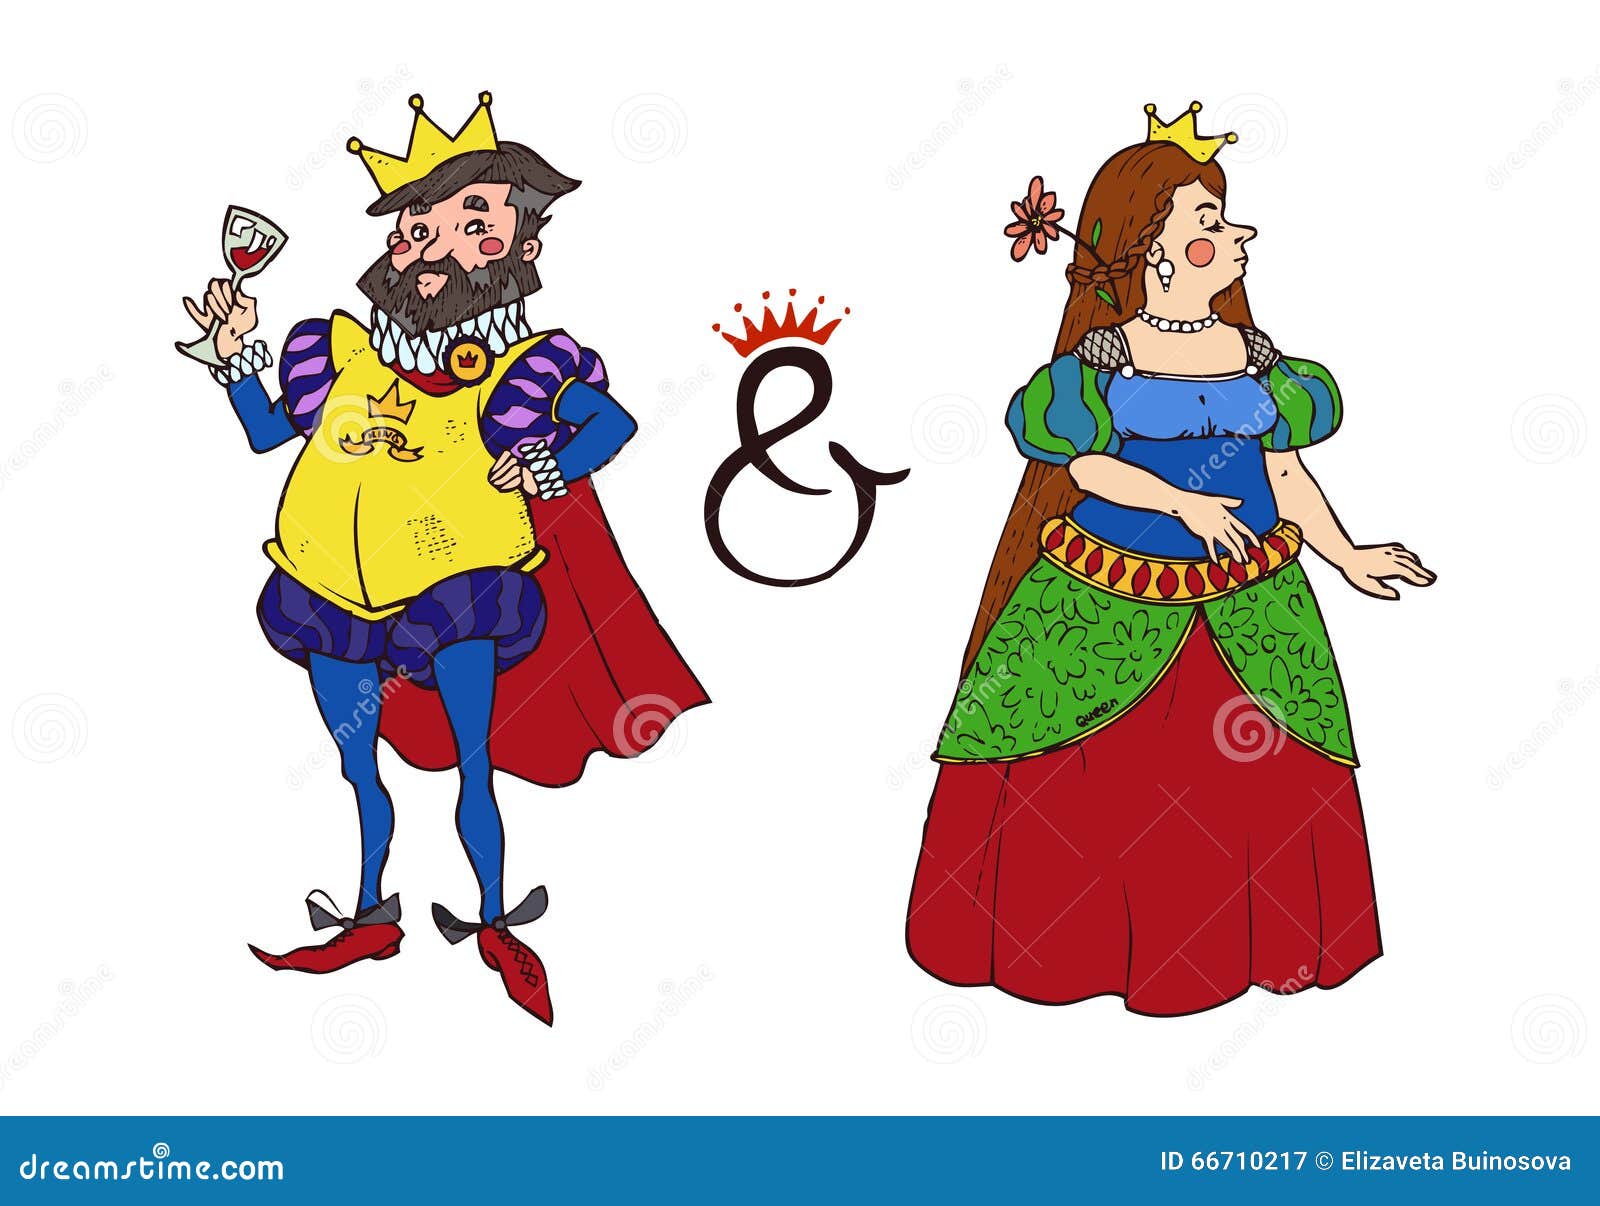 clipart of king and queen - photo #25